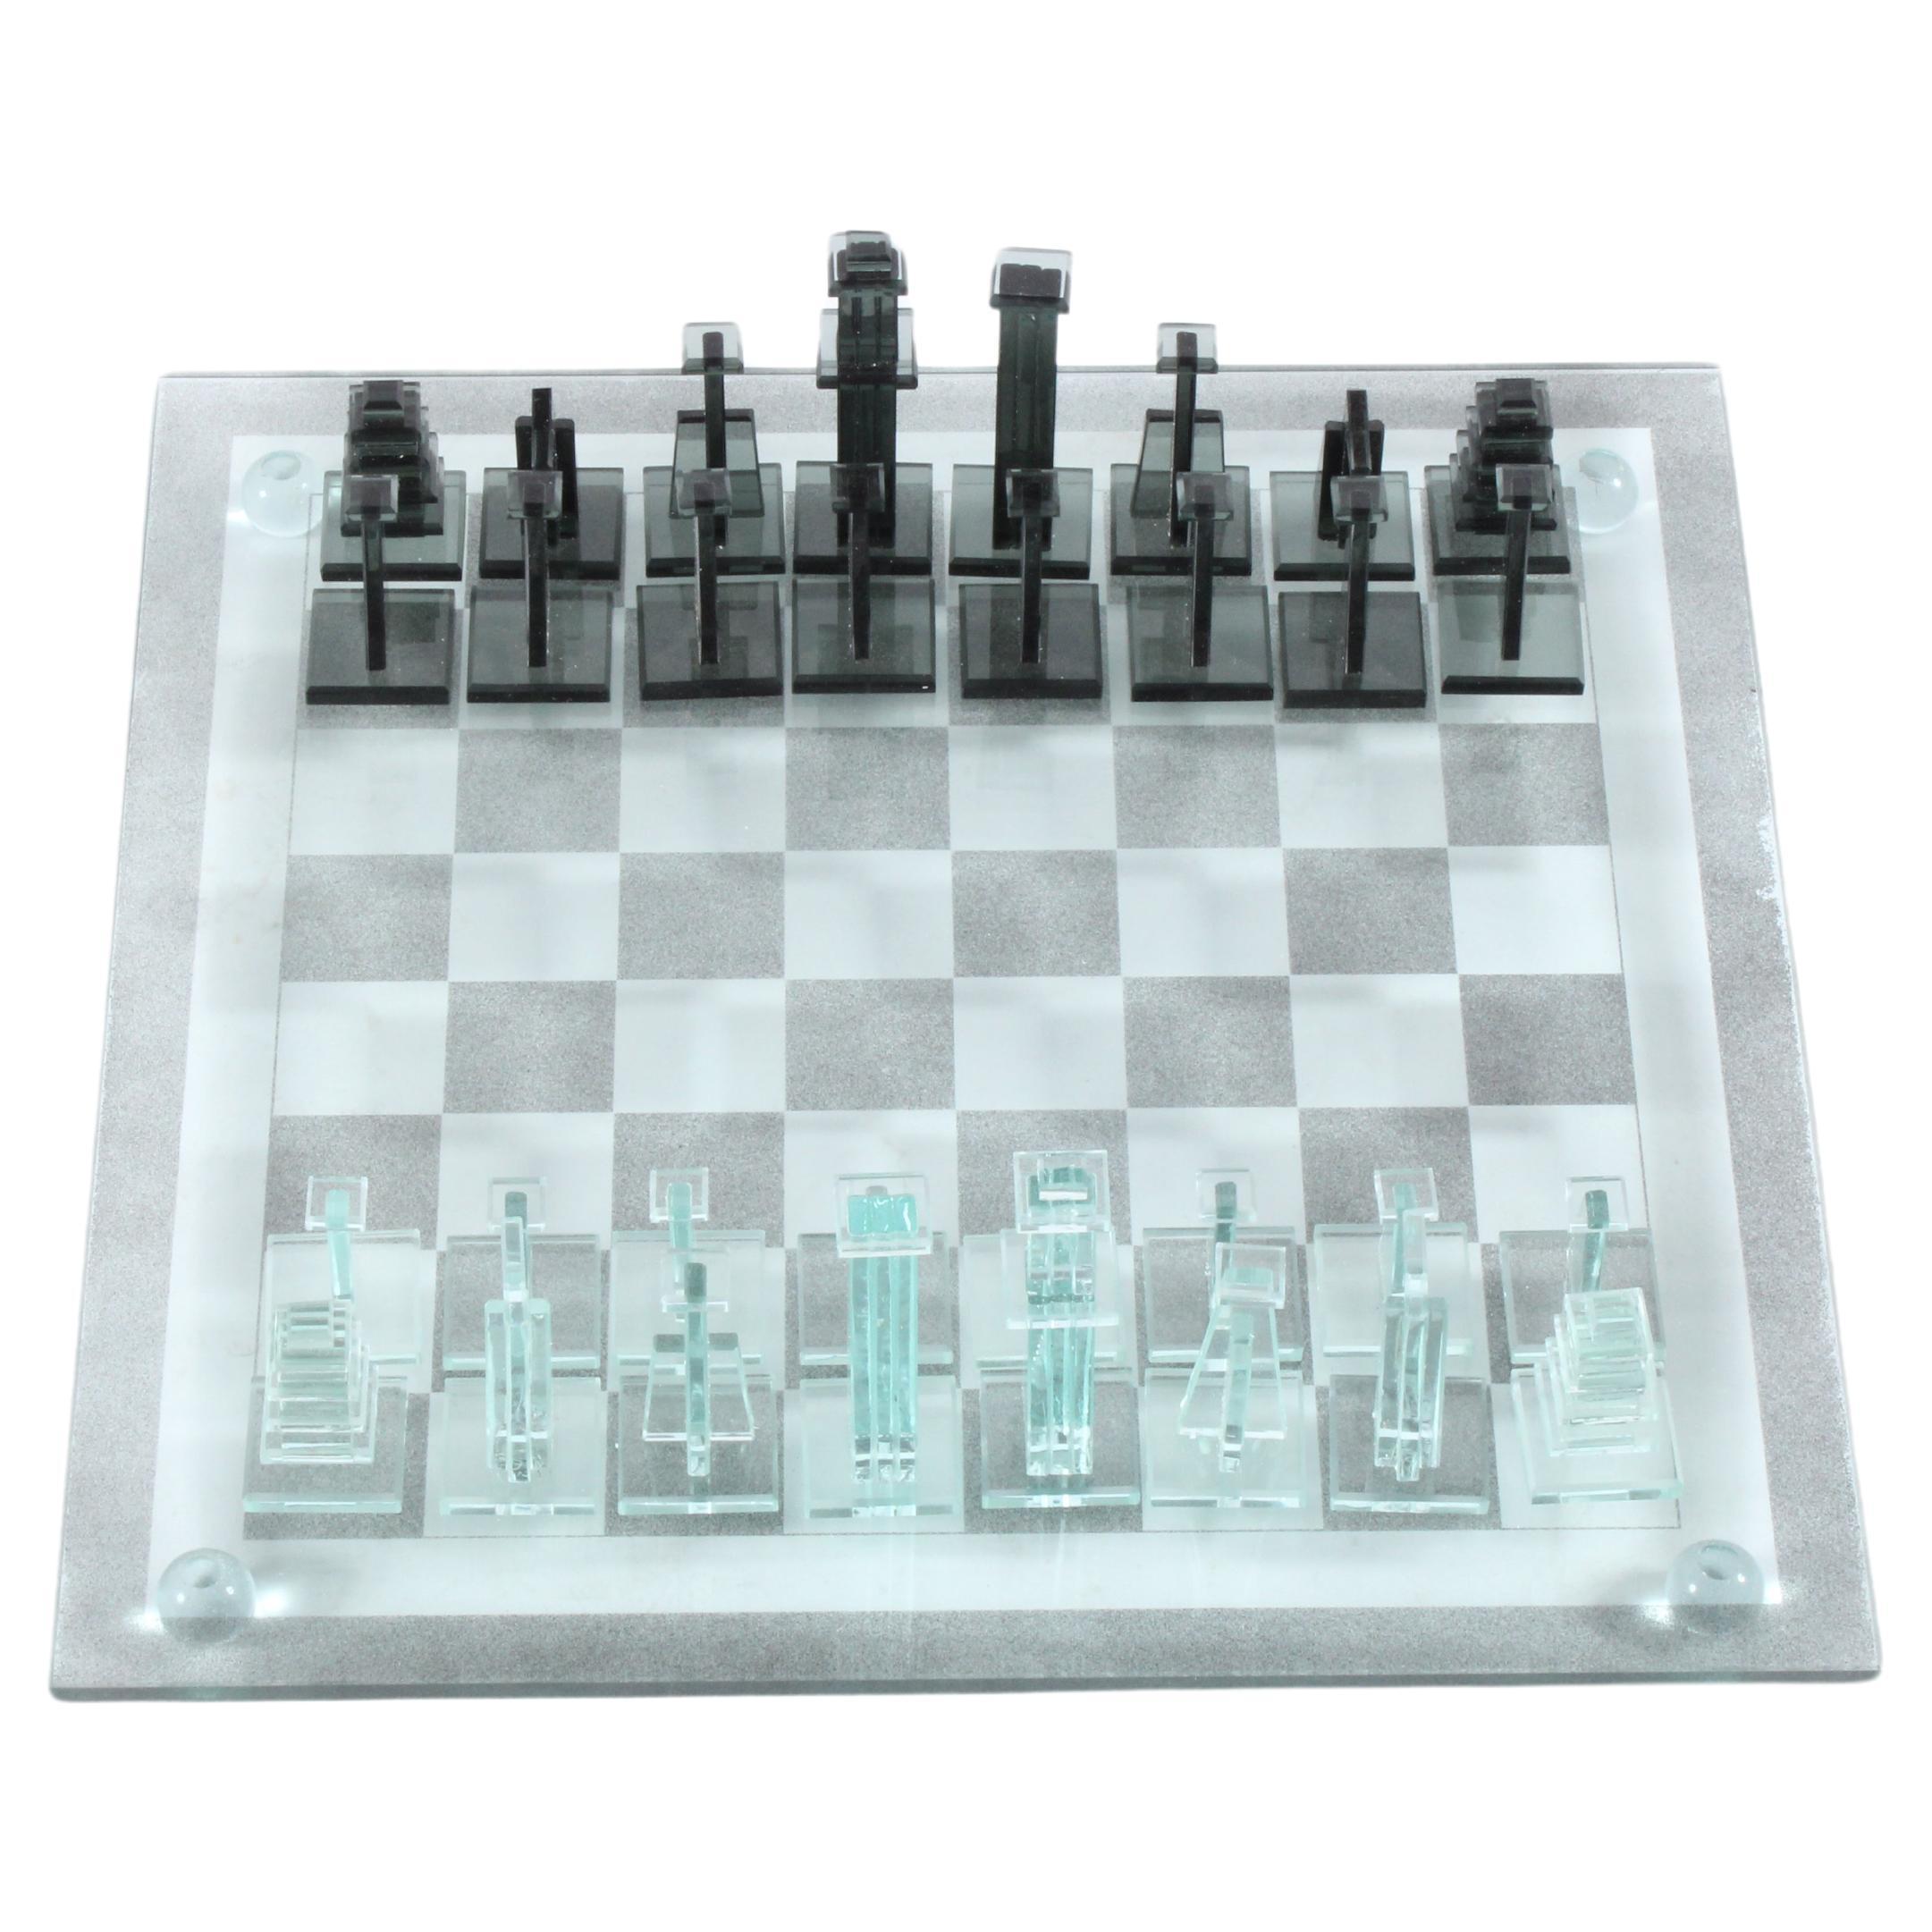 Bespoke Vintage Artisan Glass Chess Set with board and pieces  *Free Shipping